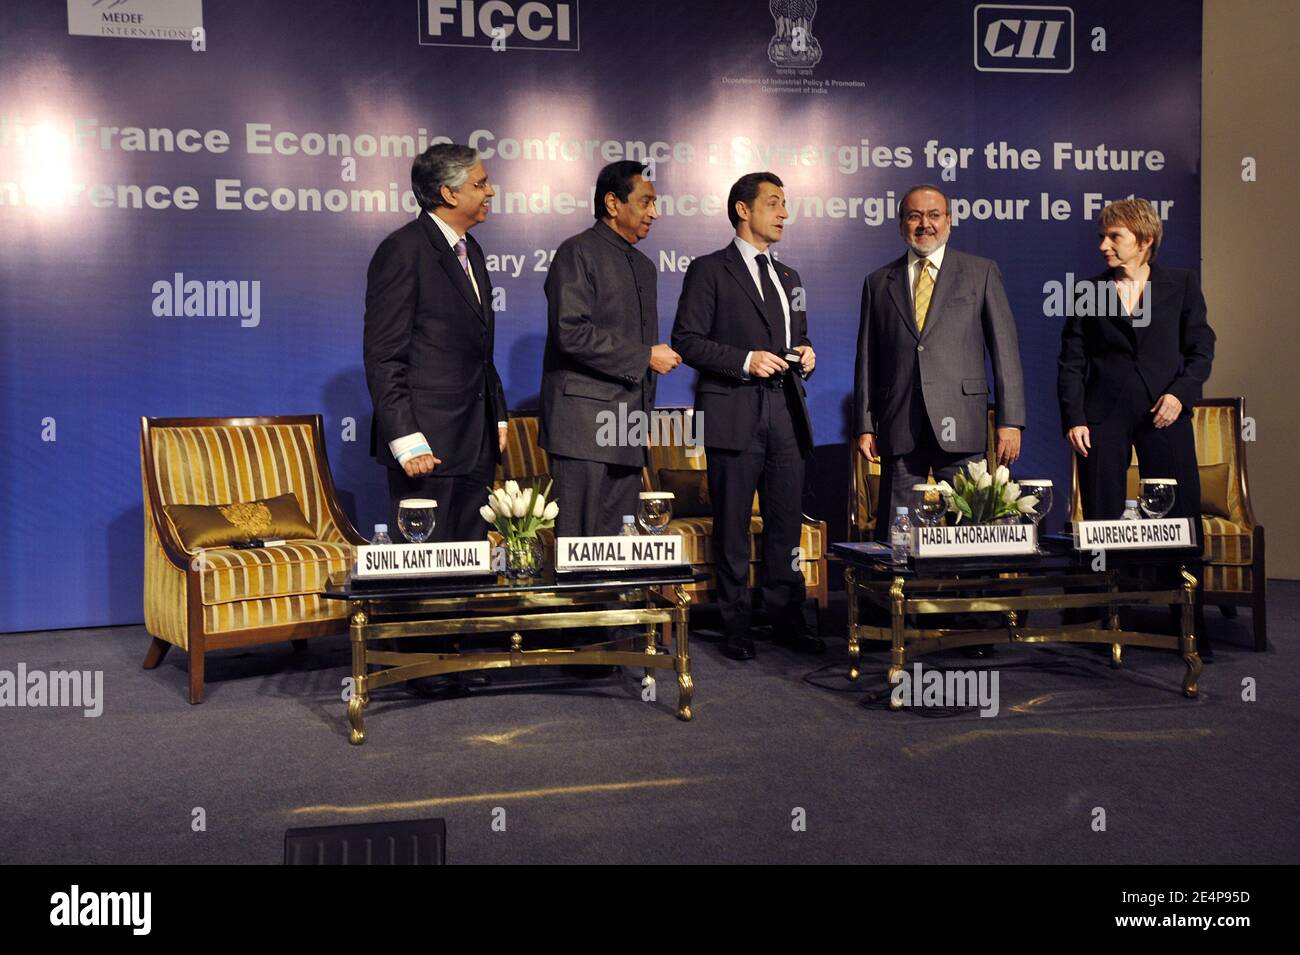 French President Nicolas Sarkozy (C) with Sunil Kant Munjal (L), Past President, CII and Chairman, Hero Corporate Services Ltd and Analjit Singh, Max India Group of Companies, are the other Co-Chairmen, Kamal Nath (2nd from L) Minister of Commerce and Industry, is the Chairman of the event for the fourth consecutive year, while Bhupinder Singh Hooda, Chief Minister of Haryana, will be the Co-Chairman, Habil Khorakiwala (2nd from R) President of FICCI and Laurence Parisot (R) head of the French employer's body MEDEF attend at a France-India economic conference in New Delhi, India, on January 25 Stock Photo